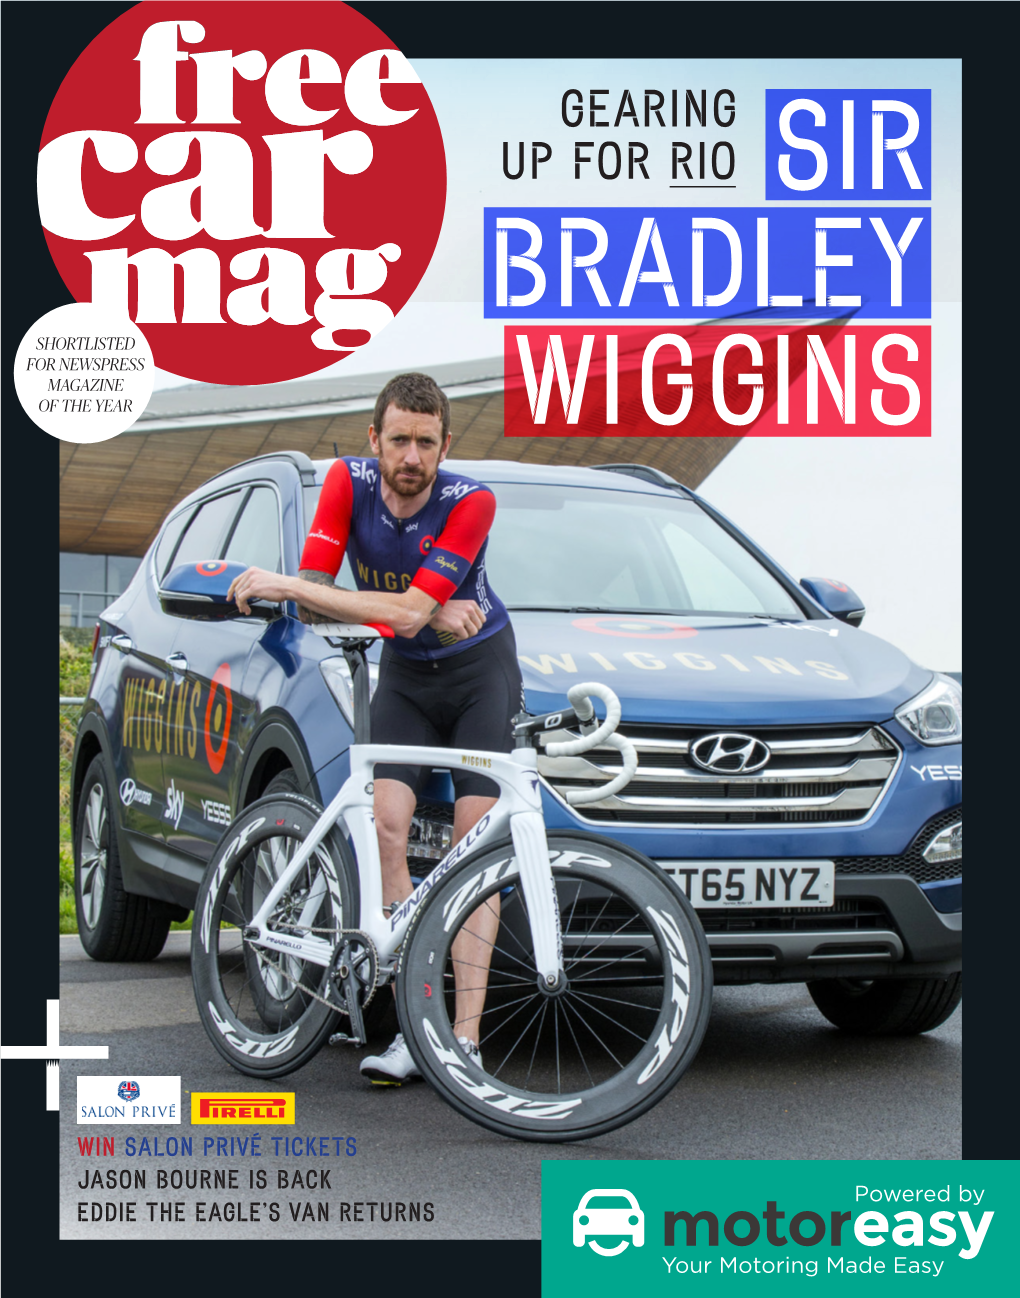 Gearing up for Ri O Sir Bradley Shortlisted for Newspress Magazine of the Year Wiggins